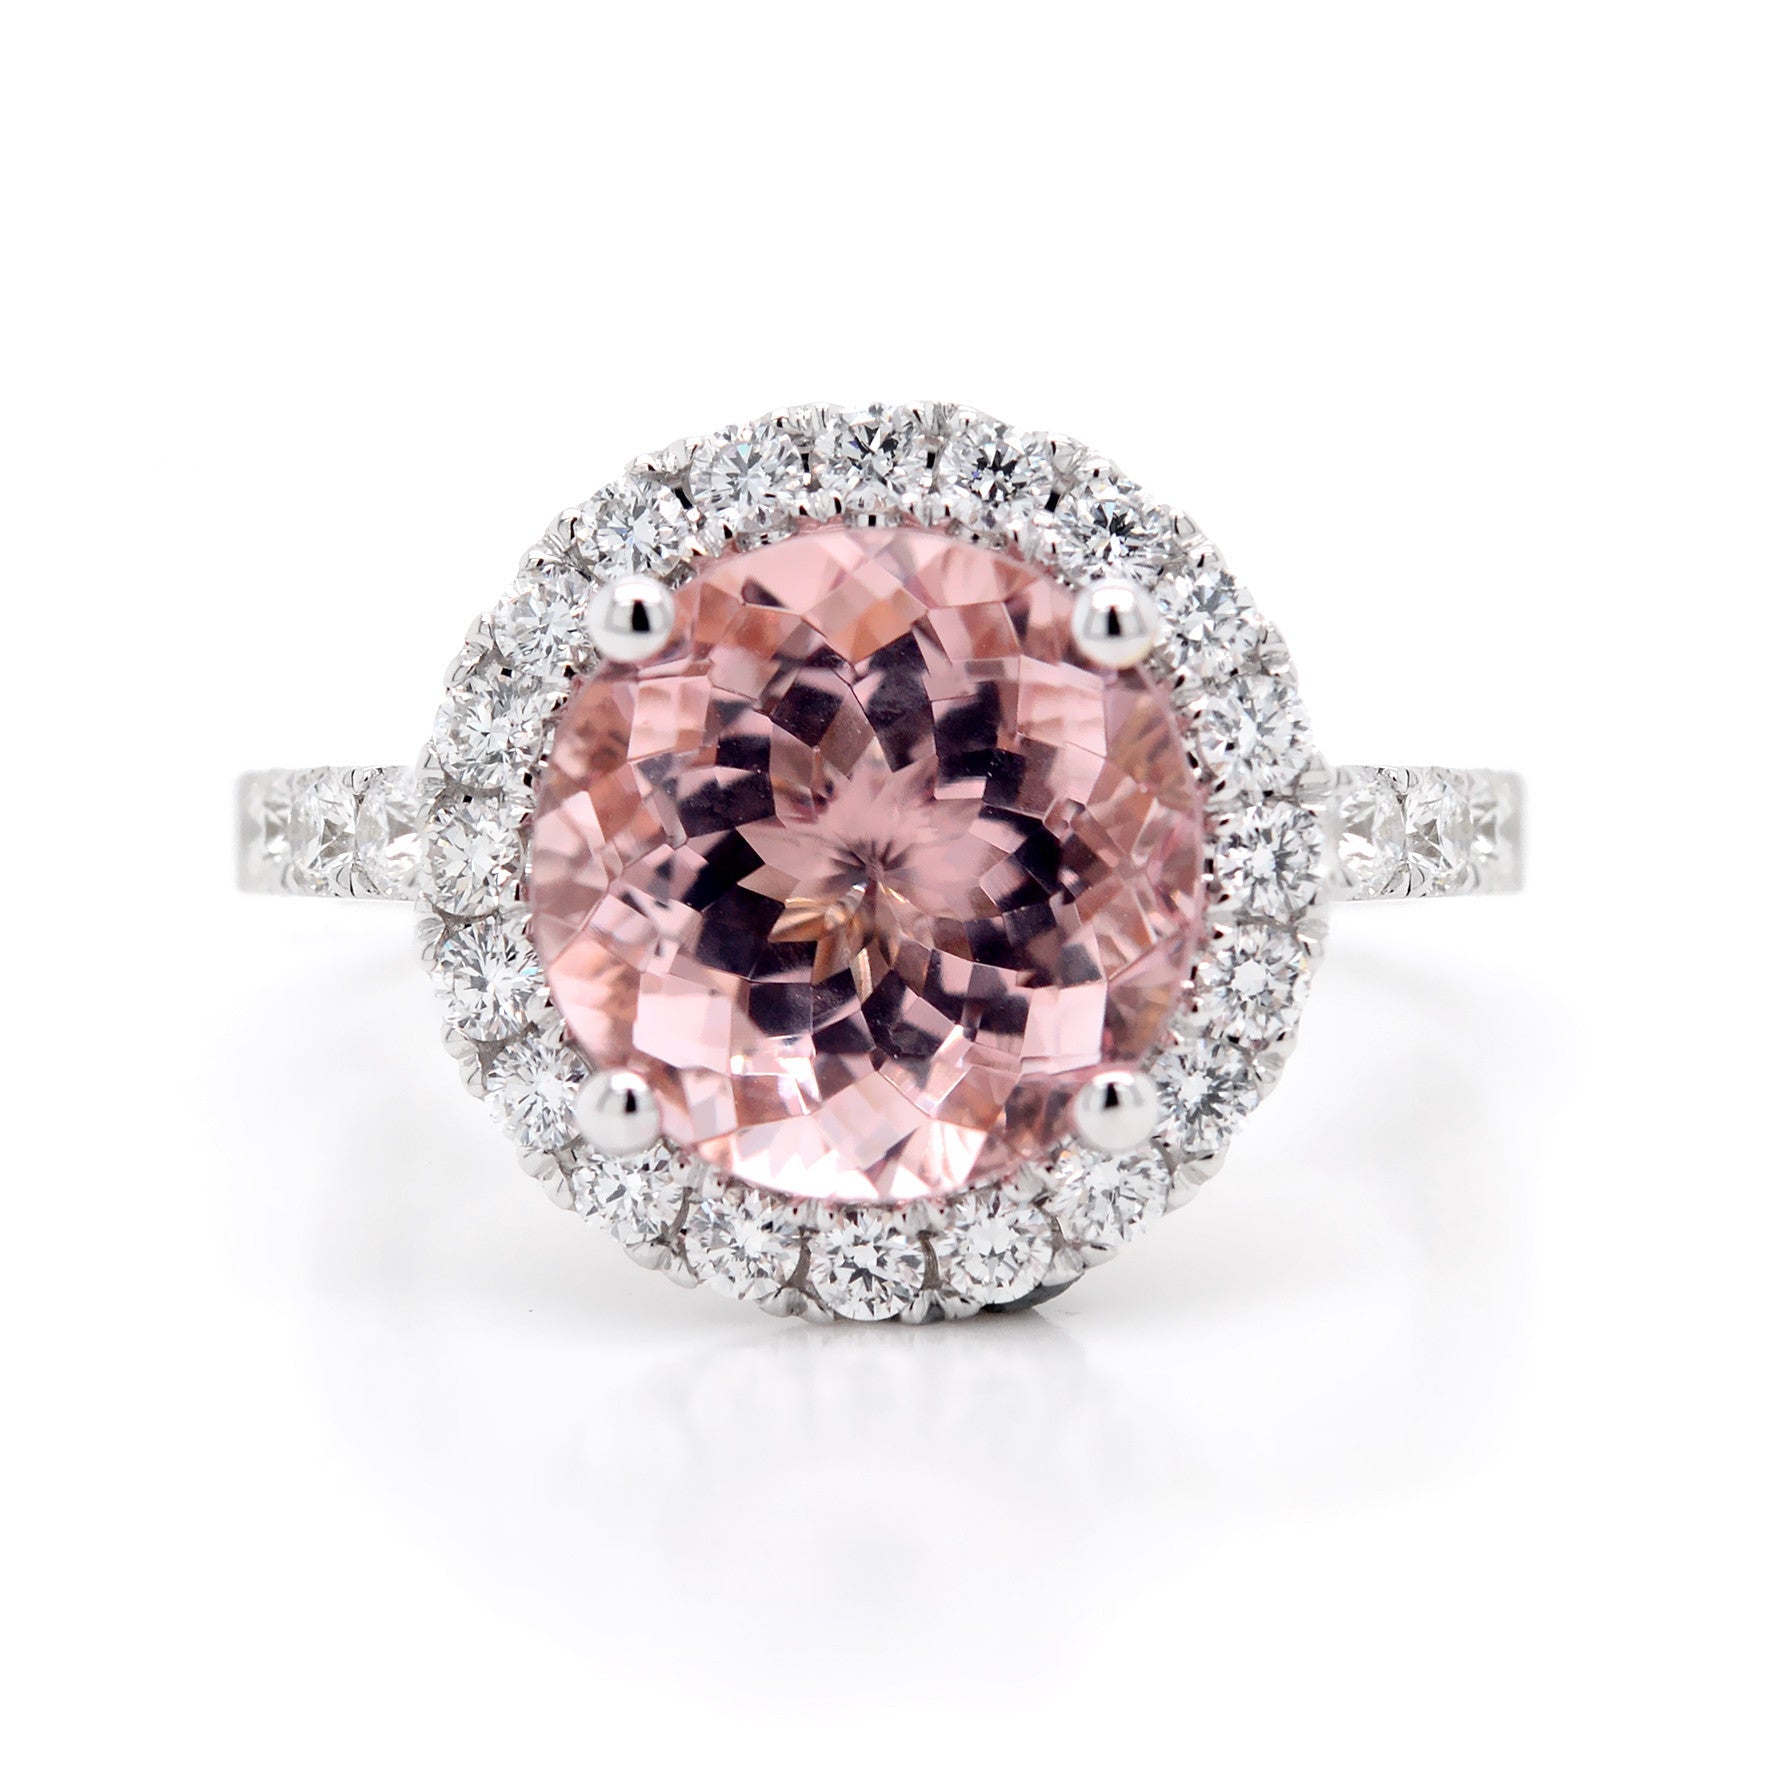 Round Morganite Dress Ring with a Halo of Diamonds - ForeverJewels Design Studio 8